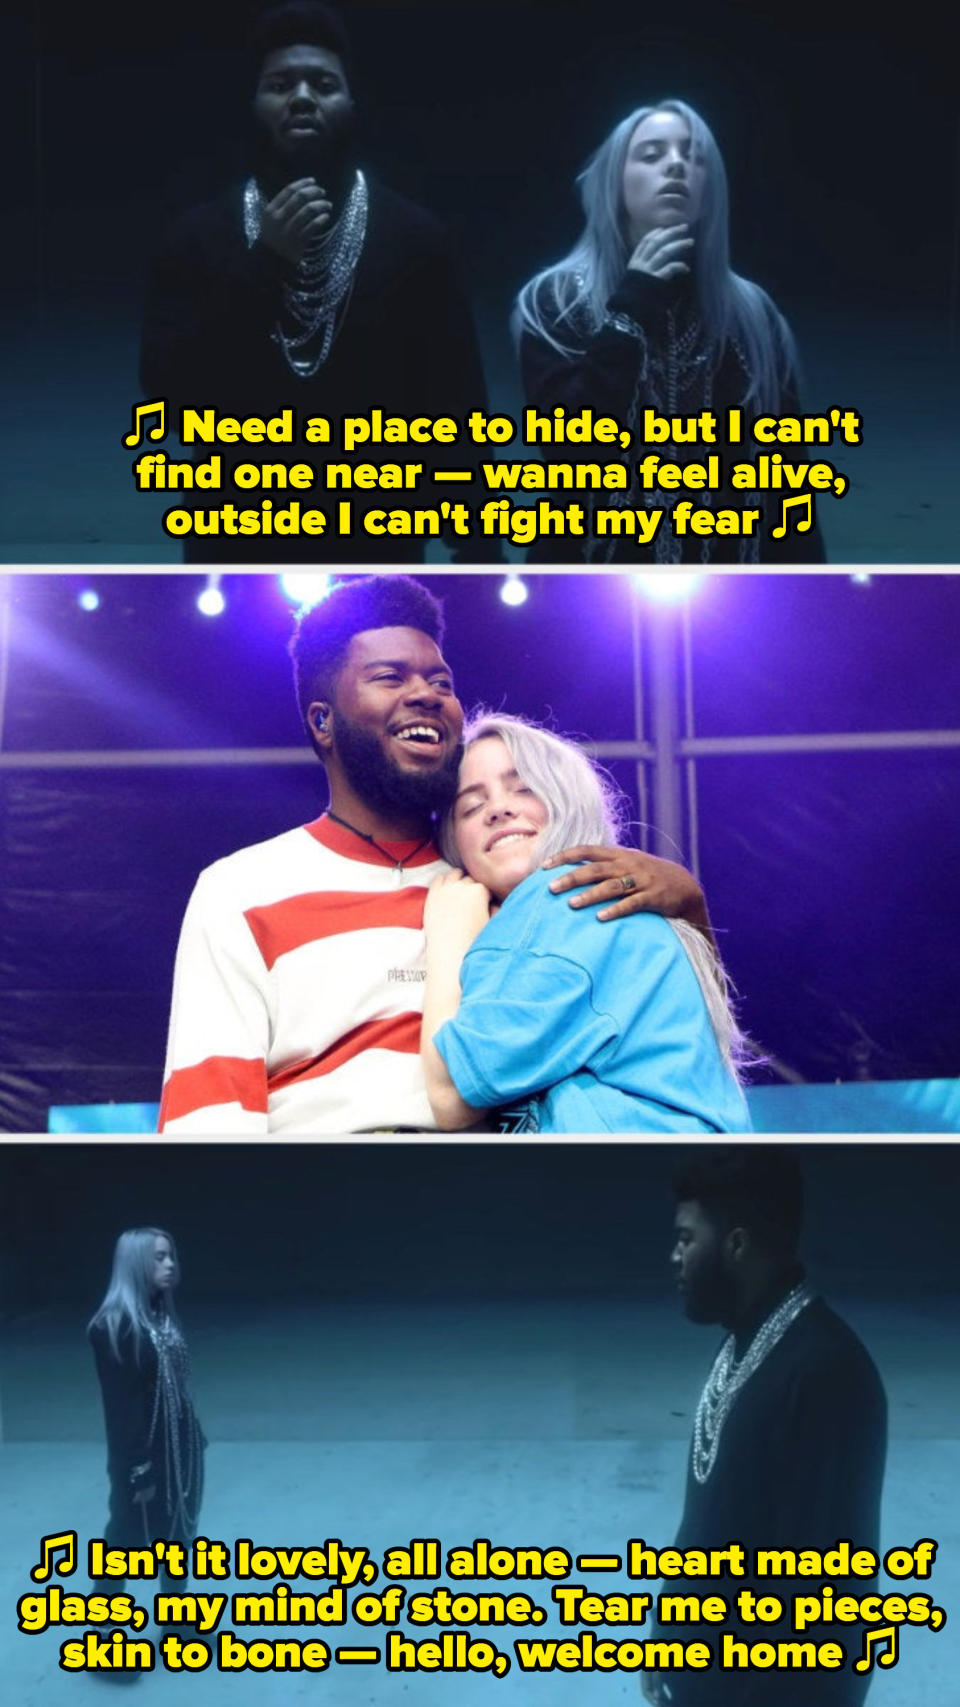 Eilish and Khalid performing live together at Governor's Ball in 2018; Eilish and Khalid in their "lovely" music video, singing: "Need a place to hide, but I can't find one near — wanna feel alive, outside I can't fight my fear"